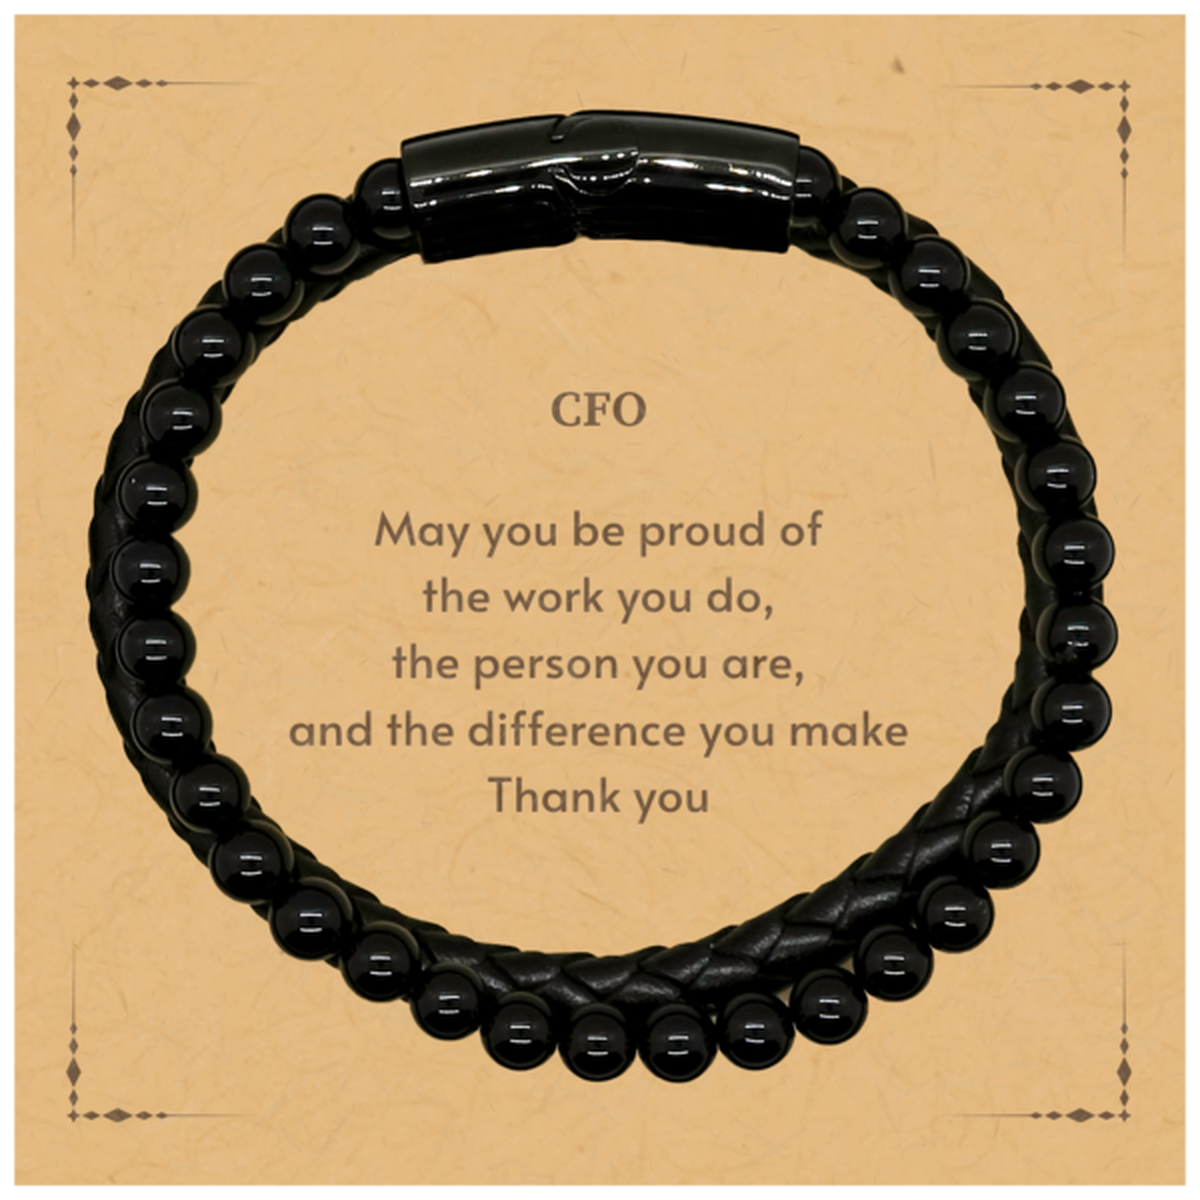 Heartwarming Stone Leather Bracelets Retirement Coworkers Gifts for CFO, CFO May You be proud of the work you do, the person you are Gifts for Boss Men Women Friends